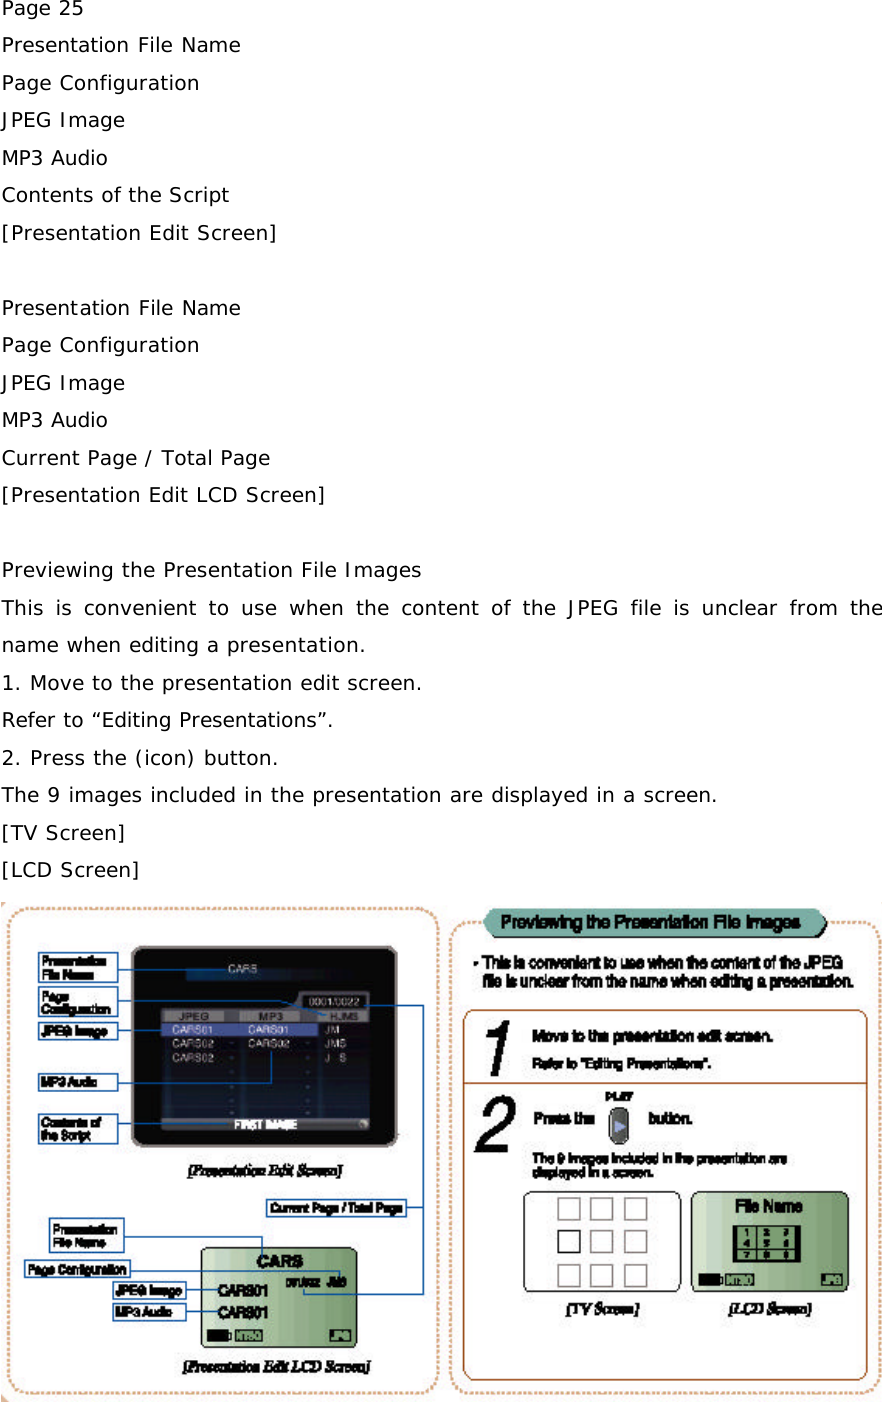 Page 25 Presentation File Name Page Configuration JPEG Image MP3 Audio Contents of the Script [Presentation Edit Screen]  Presentation File Name Page Configuration JPEG Image MP3 Audio Current Page / Total Page [Presentation Edit LCD Screen]  Previewing the Presentation File Images This is convenient to use when the content of the JPEG file is unclear from the name when editing a presentation. 1. Move to the presentation edit screen. Refer to “Editing Presentations”. 2. Press the (icon) button. The 9 images included in the presentation are displayed in a screen. [TV Screen] [LCD Screen]  